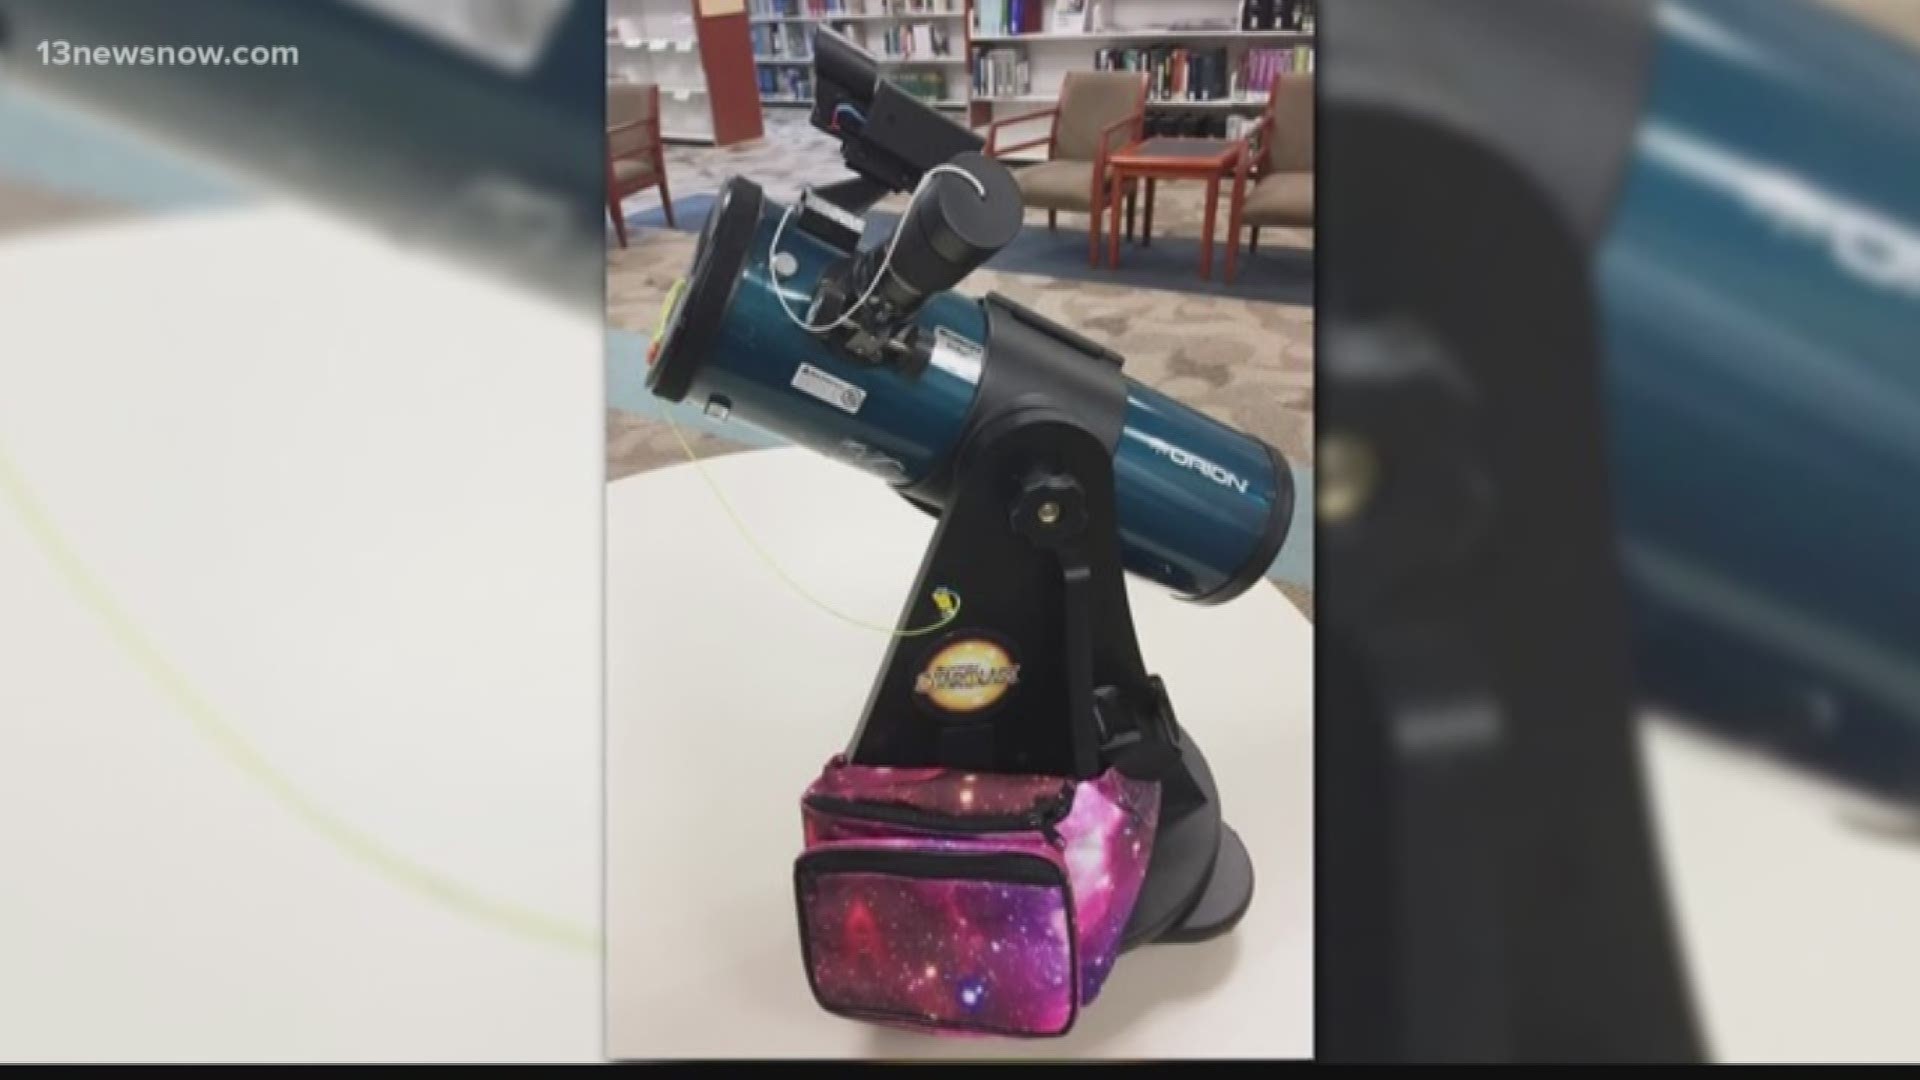 Telescopes are up for grabs at the Virginia Beach Public Library.